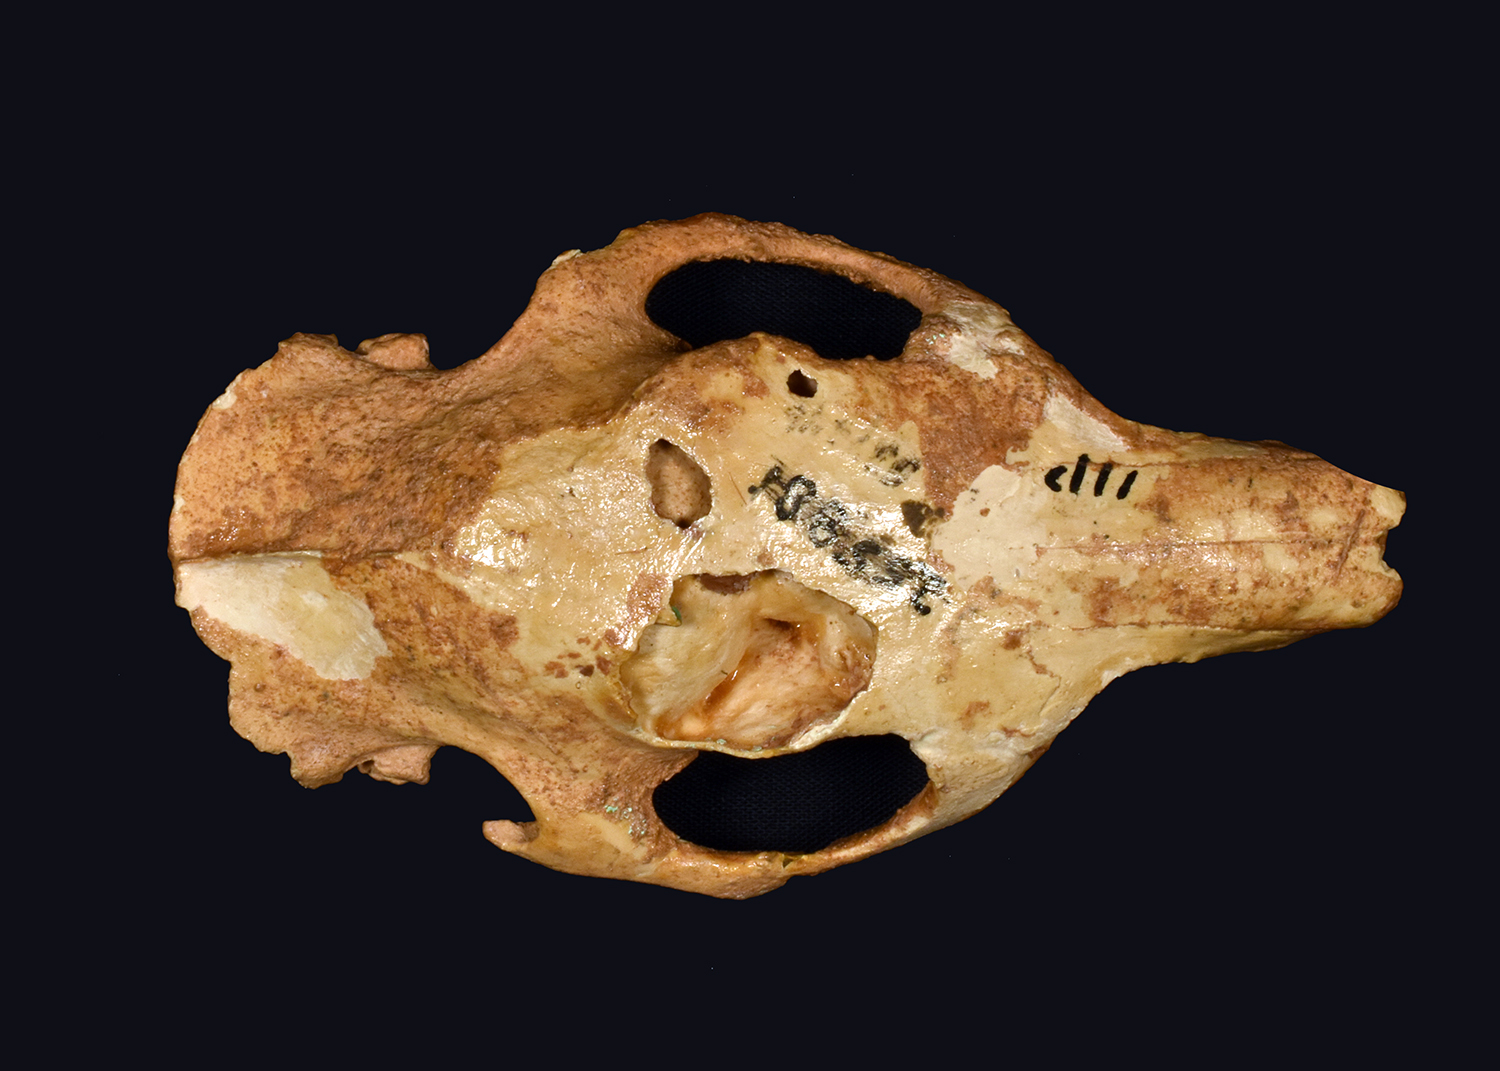 Image of a rodent skull from a superior view on a black background.